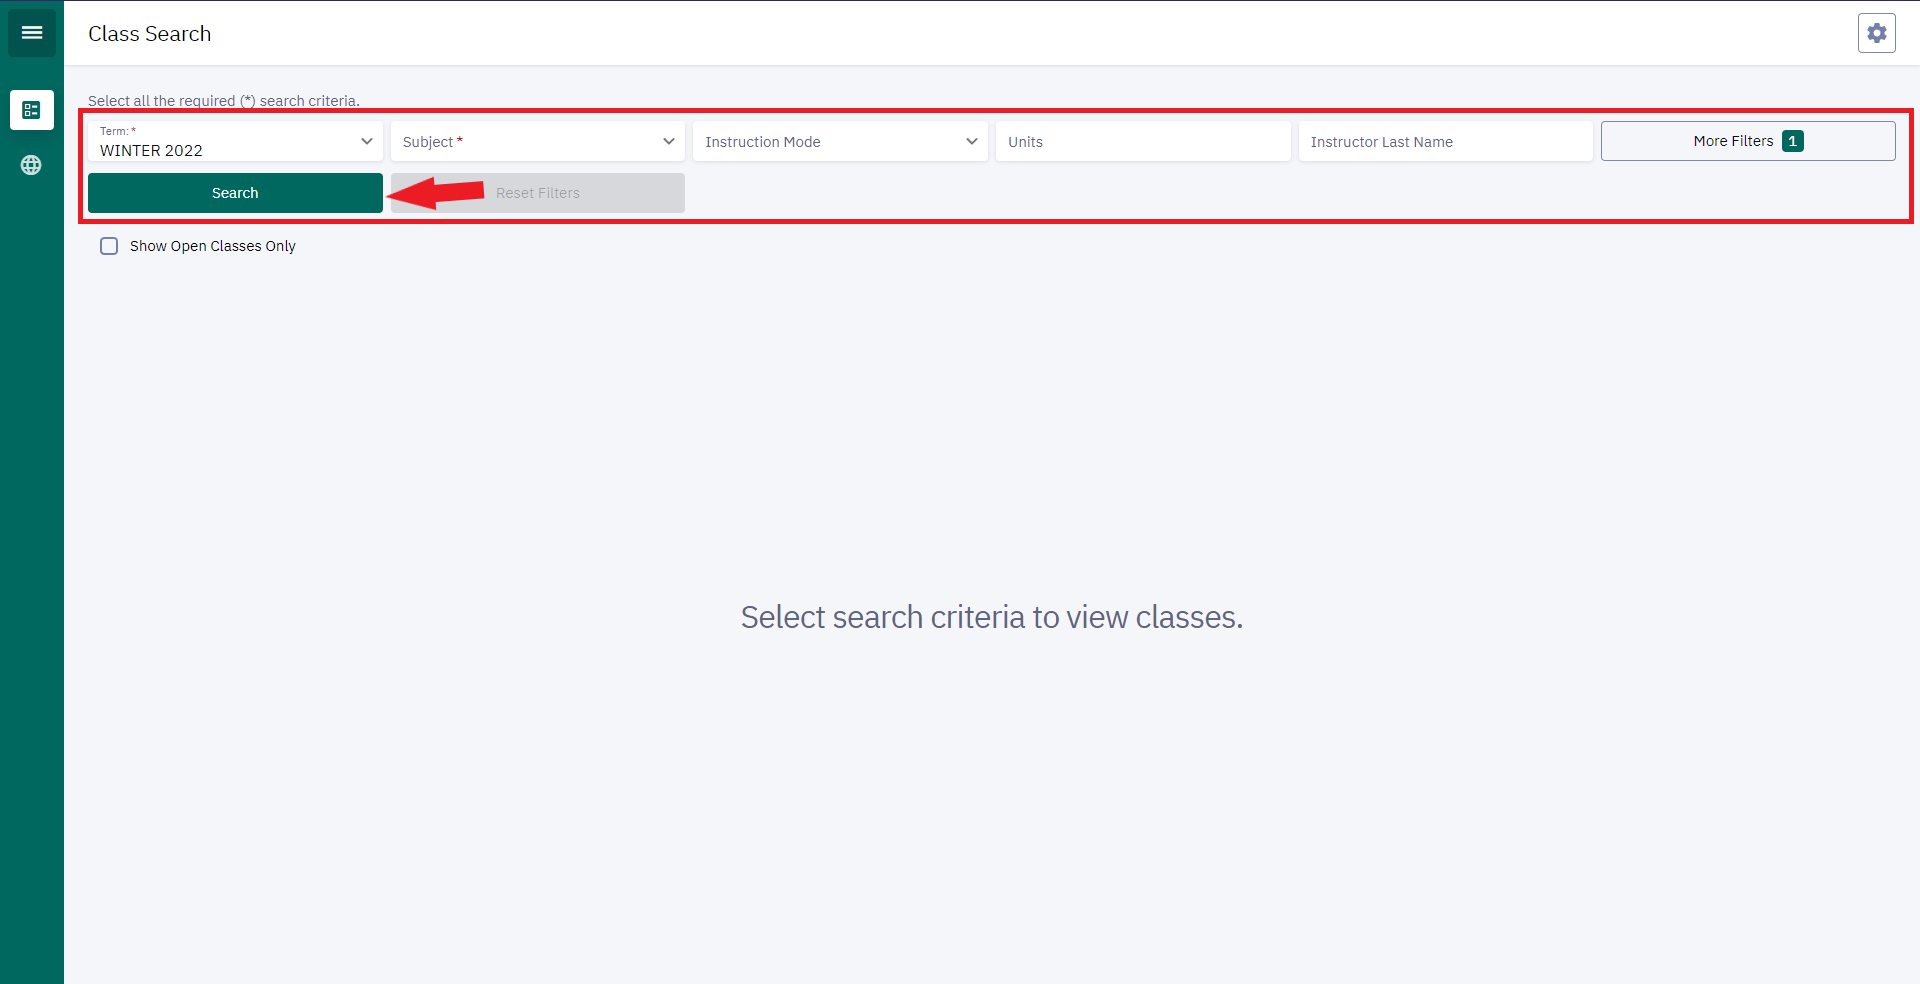 Once you've clicked the class schedule link, you'll be brought right into the class search page. Here you can set your filters for what you're trying to find, then click "Search".